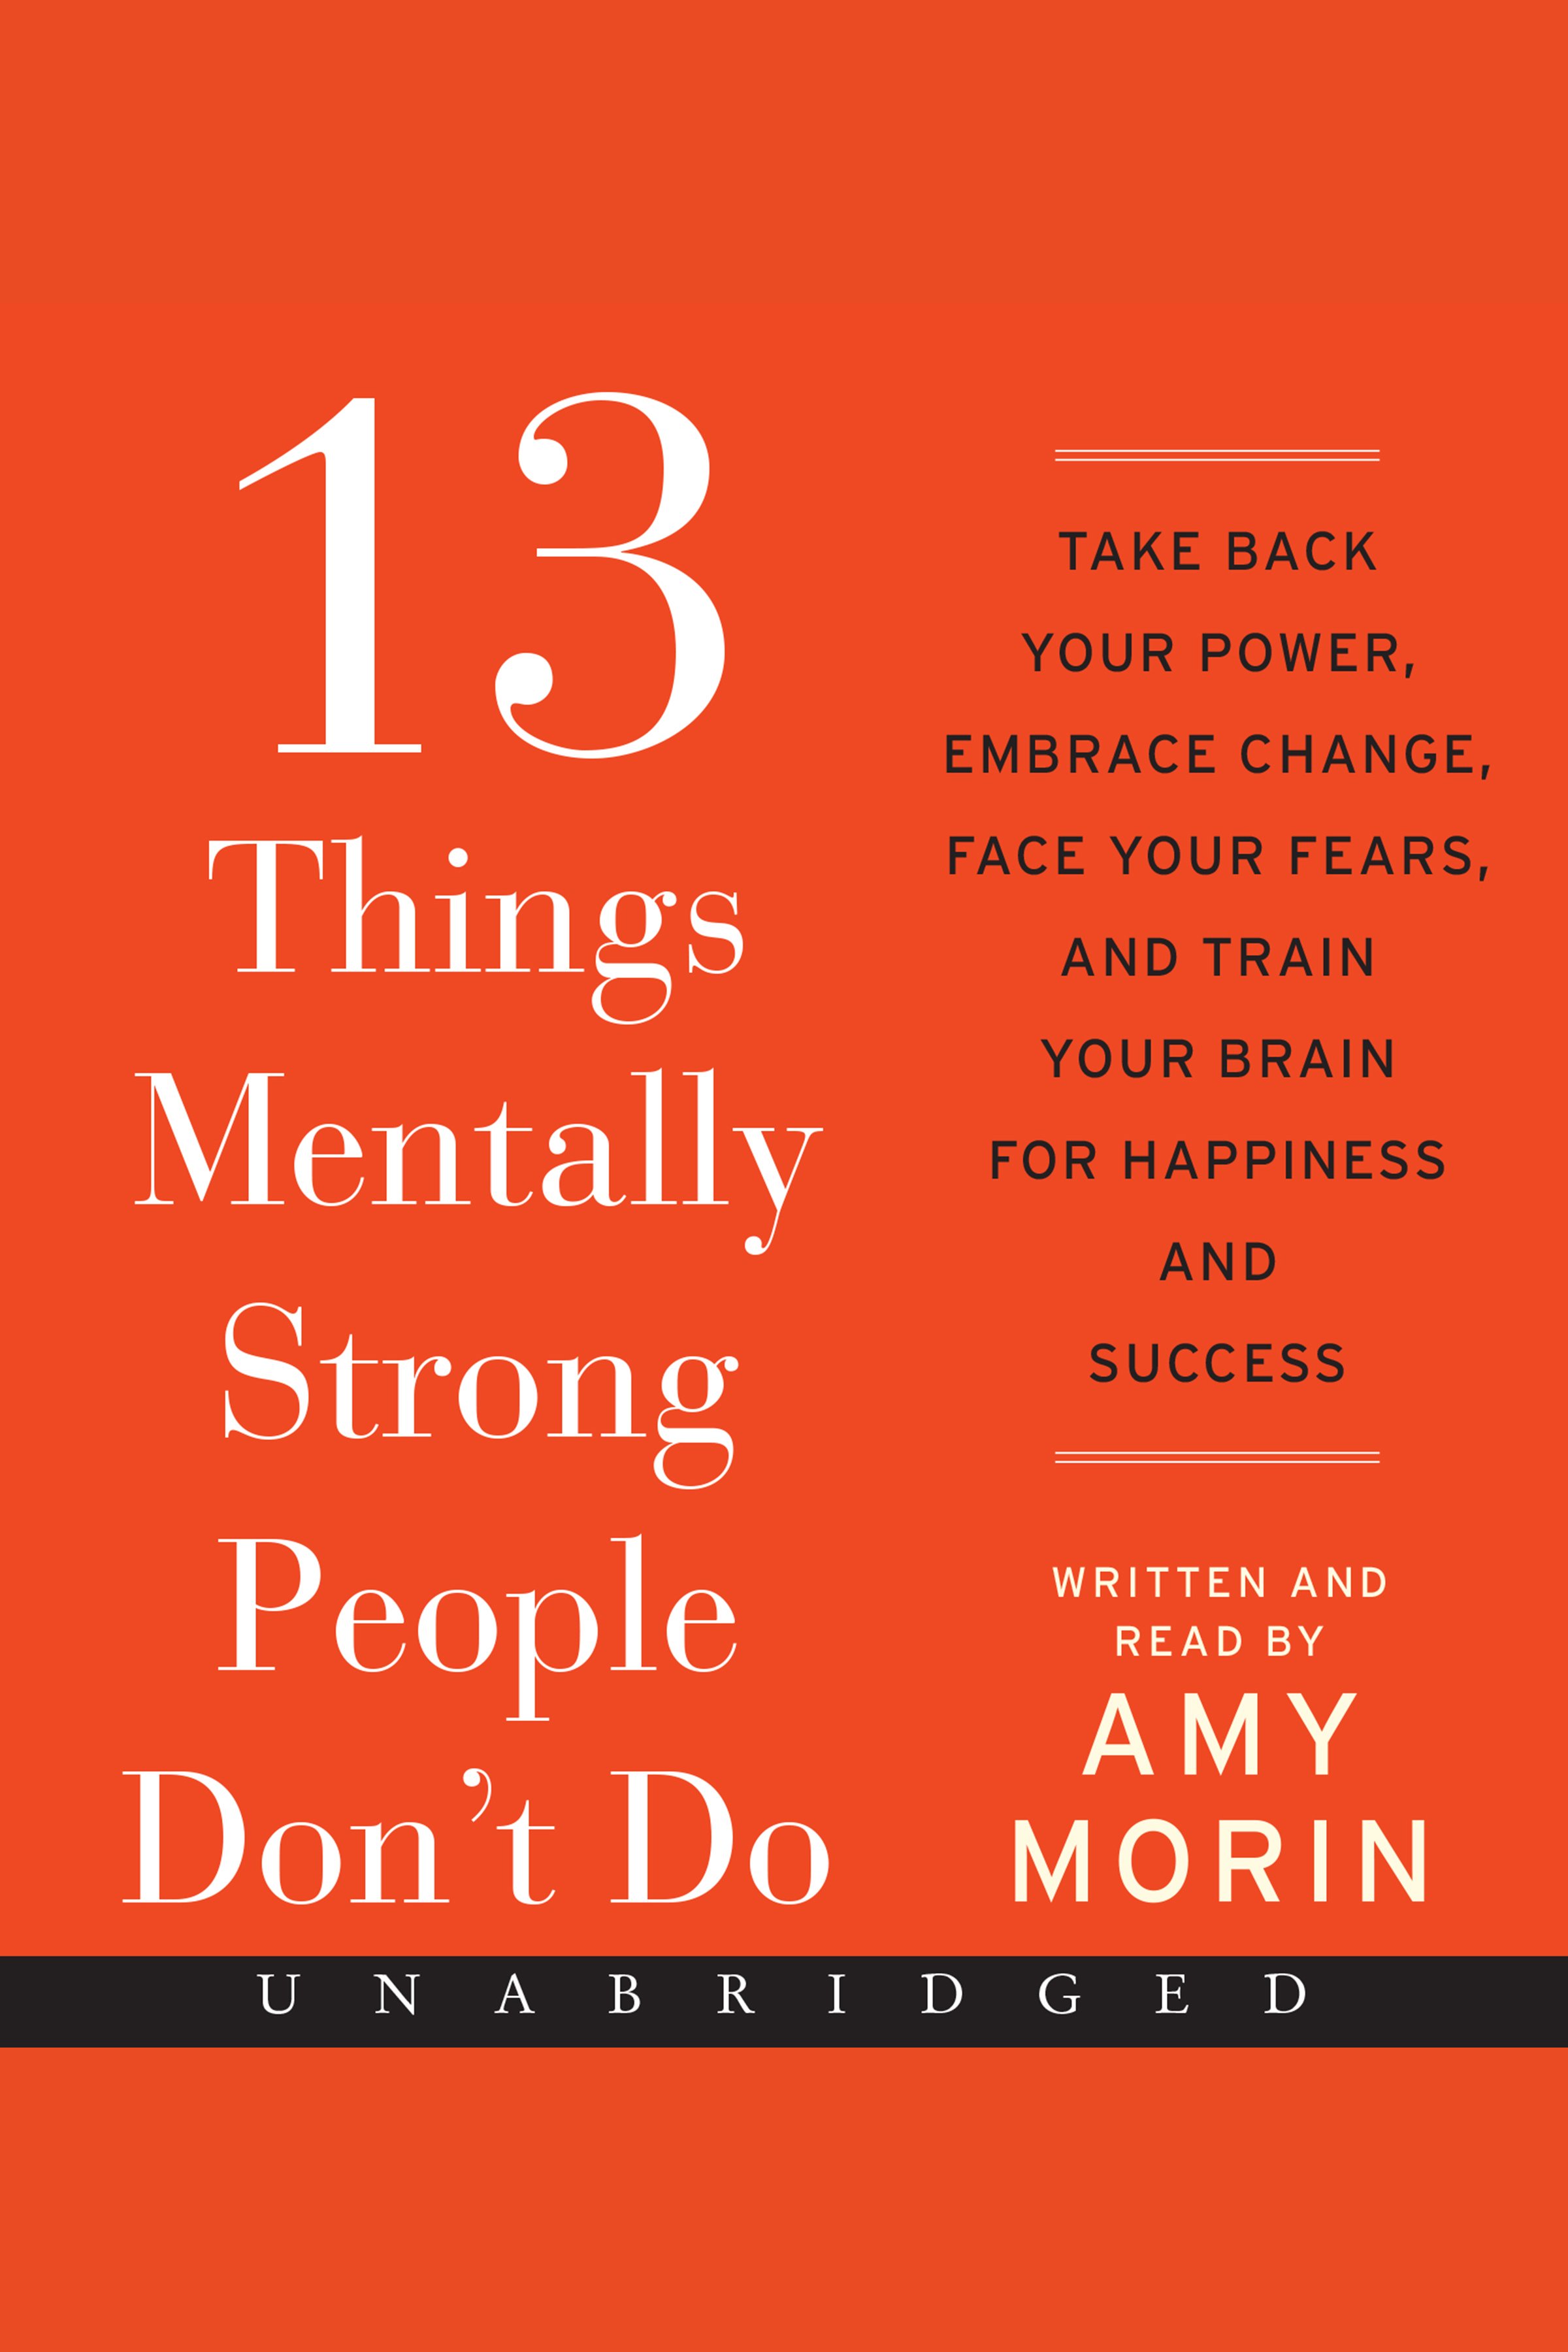 Image de couverture de 13 Things Mentally Strong People Don't Do [electronic resource] : Take Back Your Power, Embrace Change, Face Your Fears, and Train Your Brain for Happiness and Success